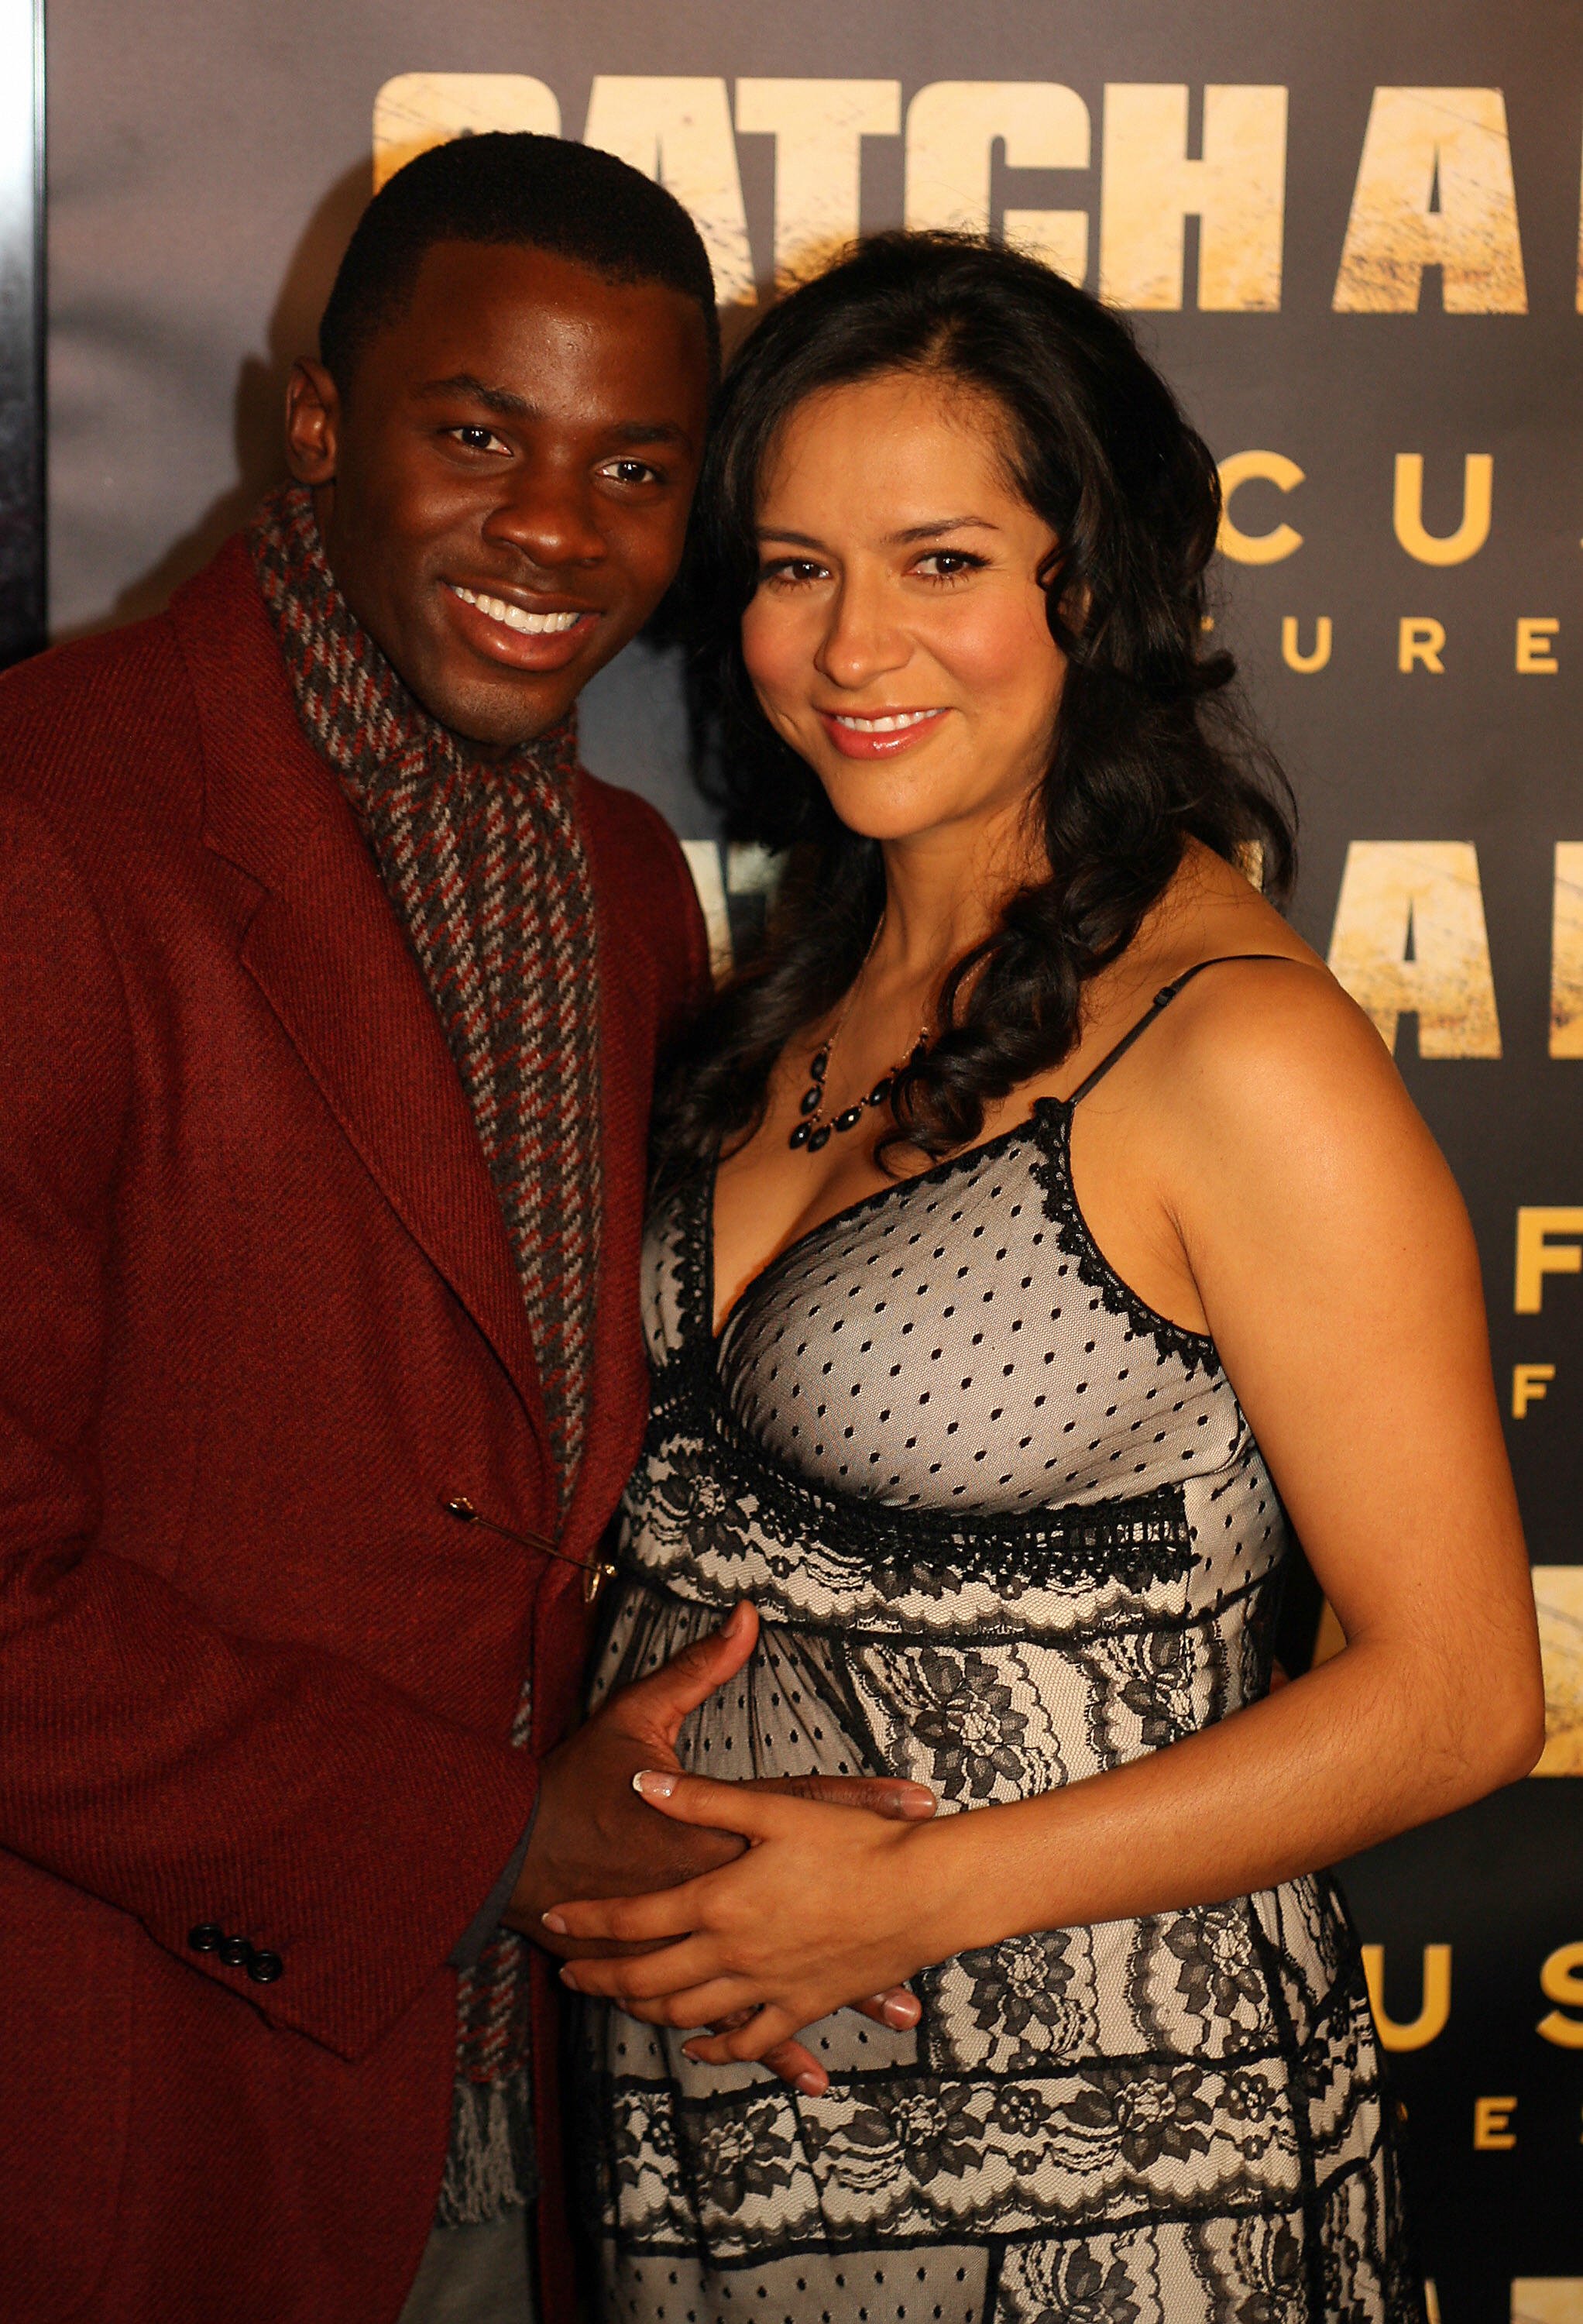 Derek Luke and his wife Sophia Adella Hernandez at the premiere of "Catch a Fire," in Hollywood, October 25, 2006 | Source: Getty Images